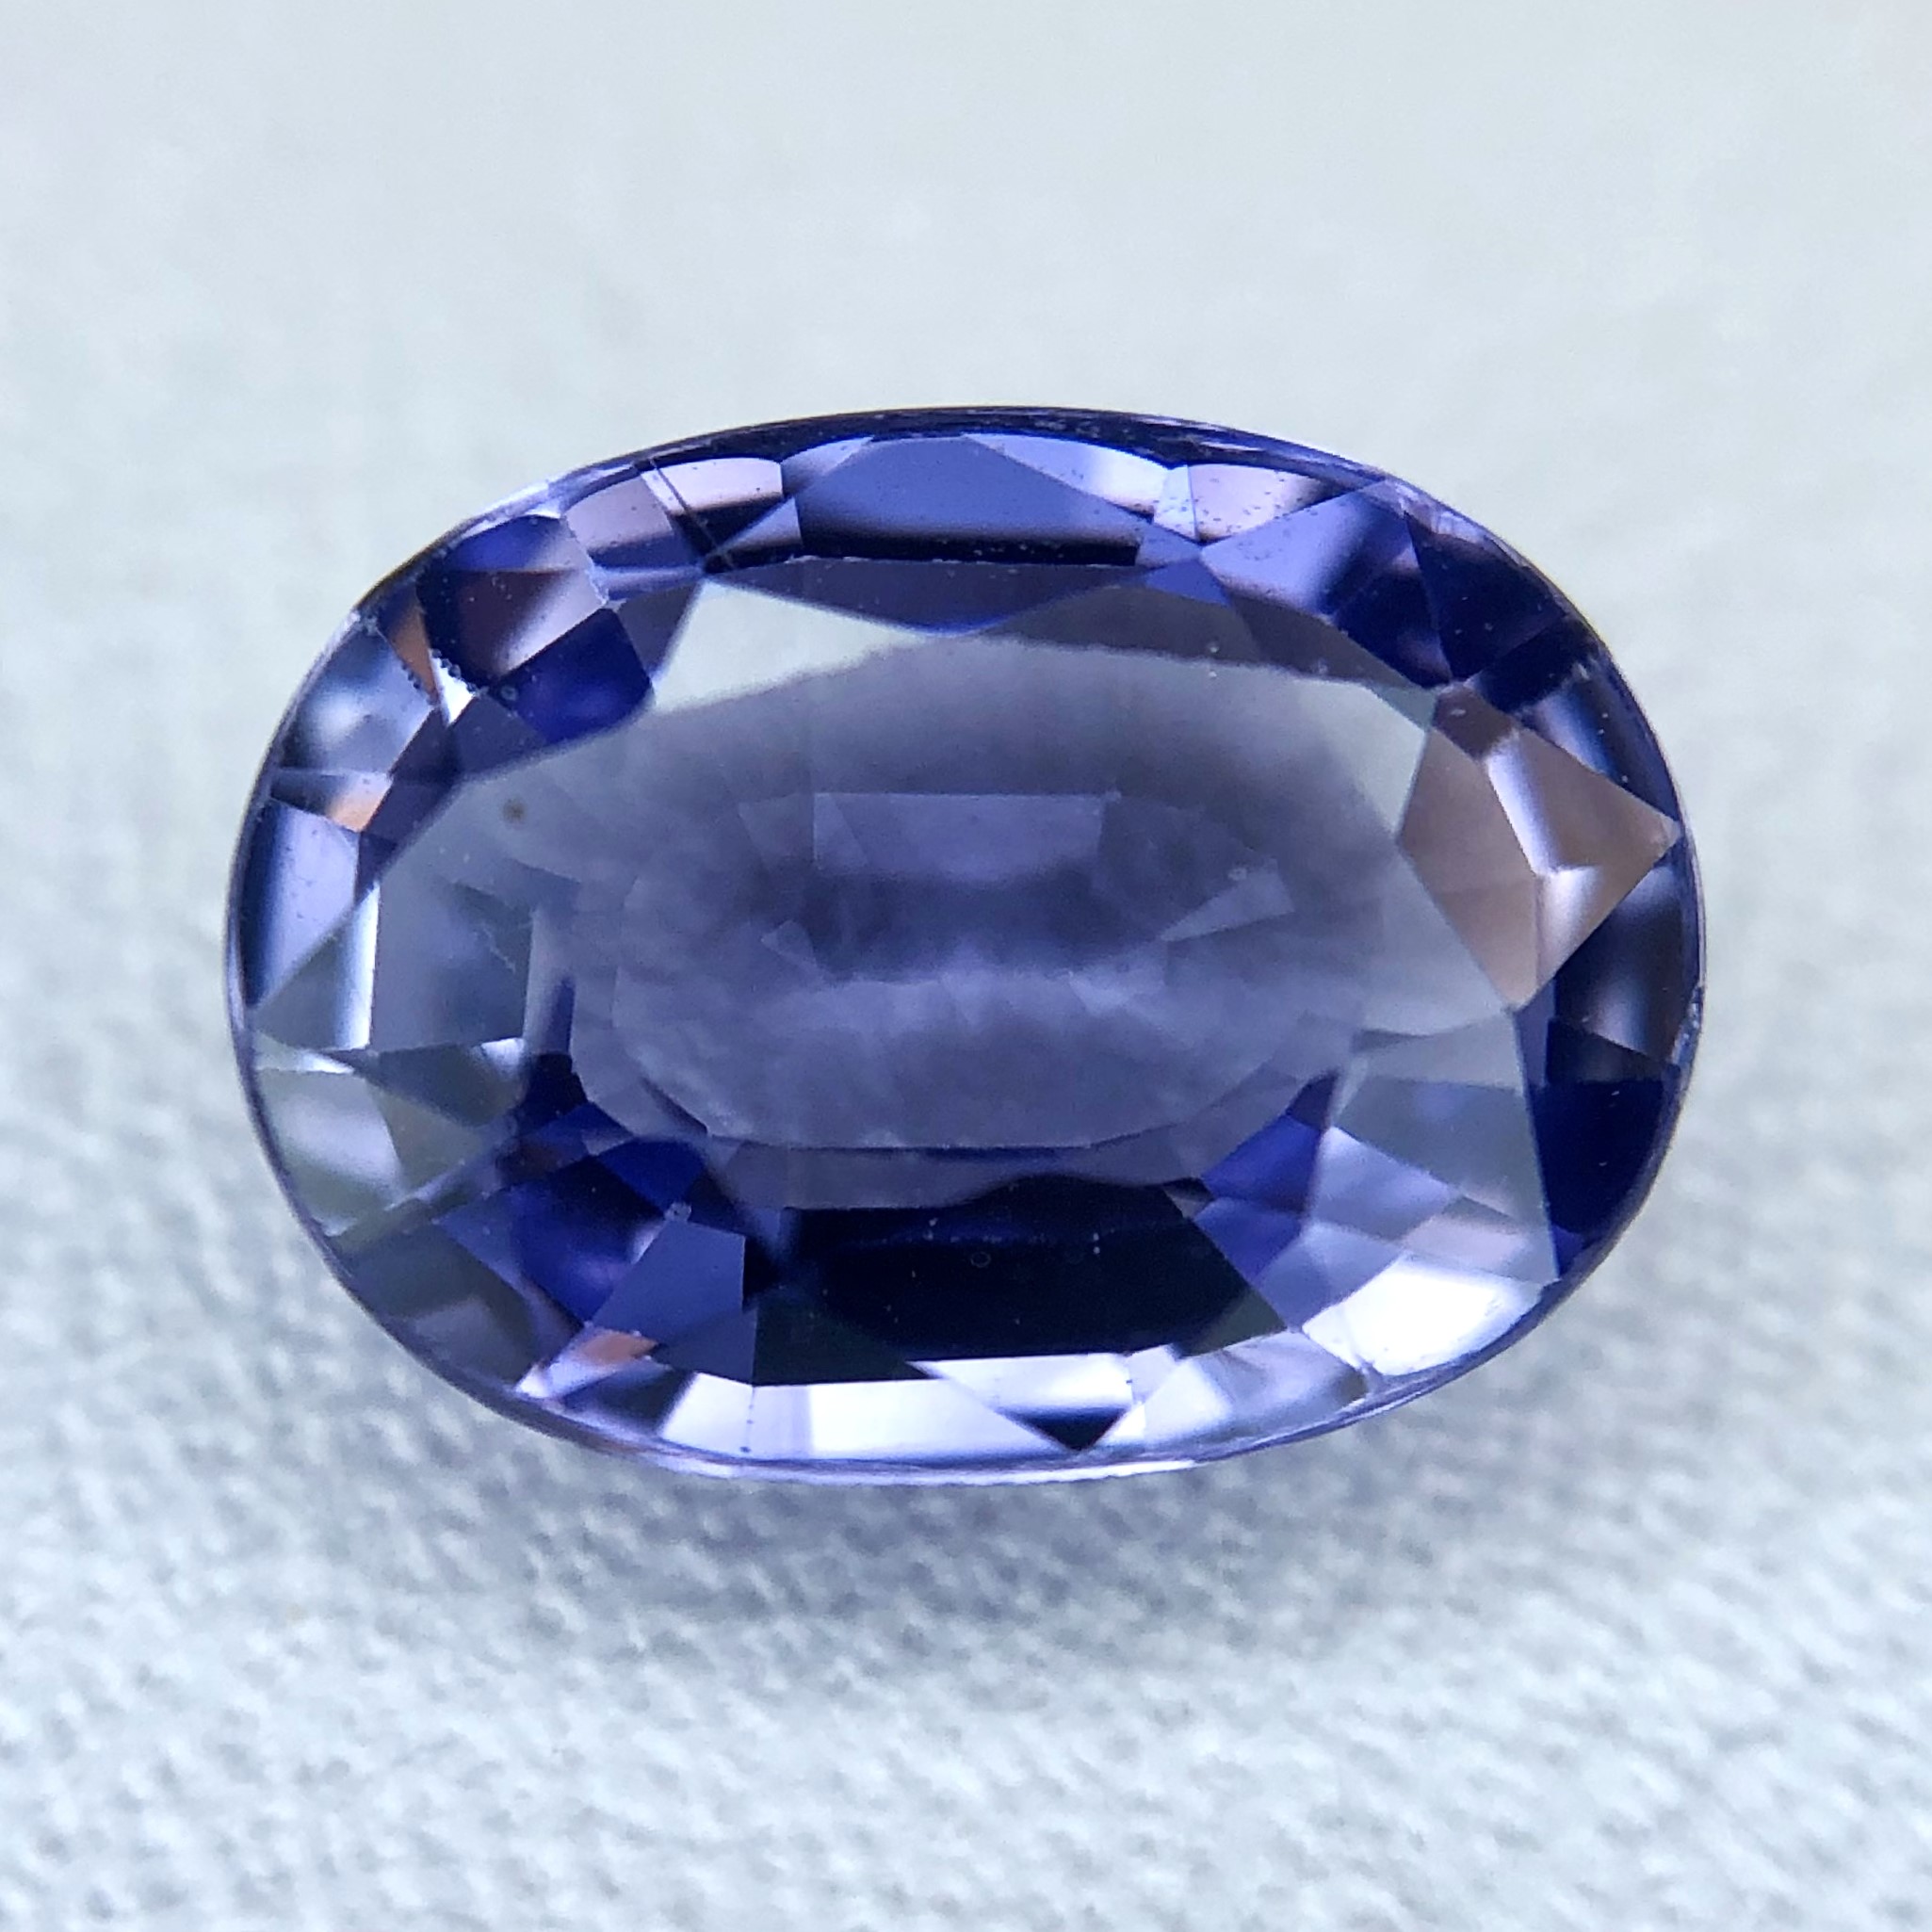 1.85ct Oval Mixed Cut Sapphire